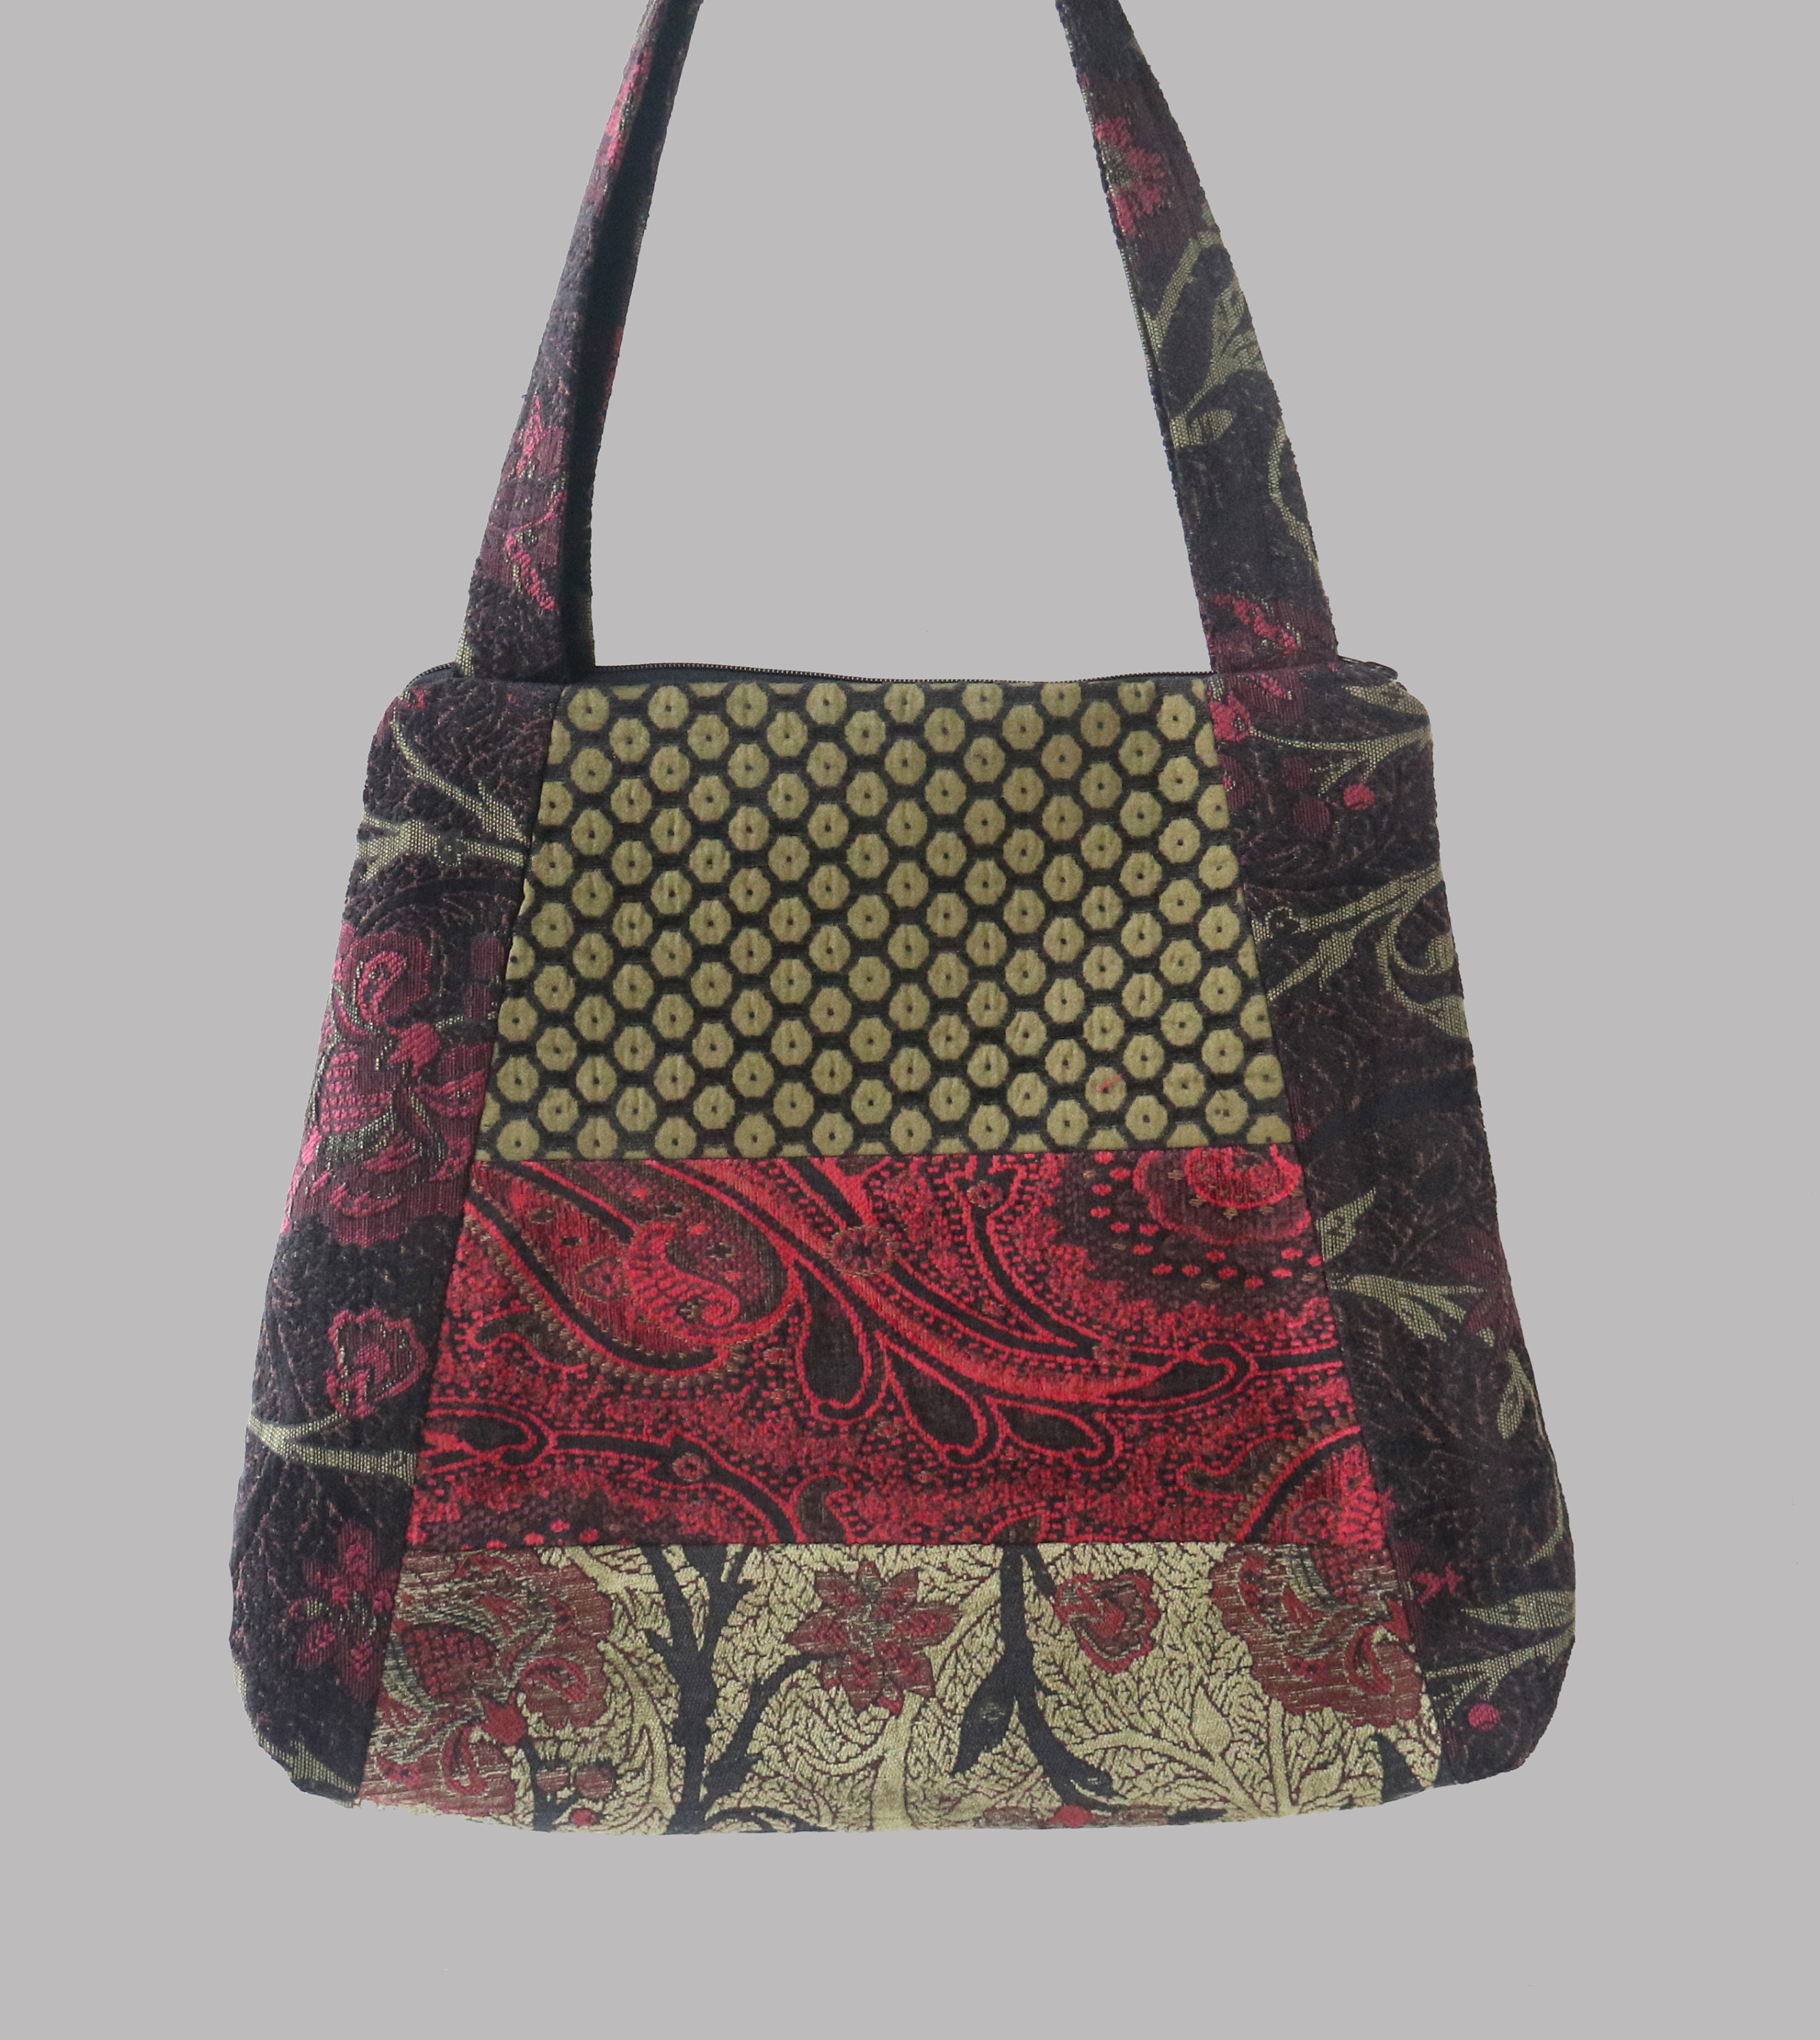 Flora Tapestry Tote Bag in Red, Black, and Sage Floral Jacquard ...